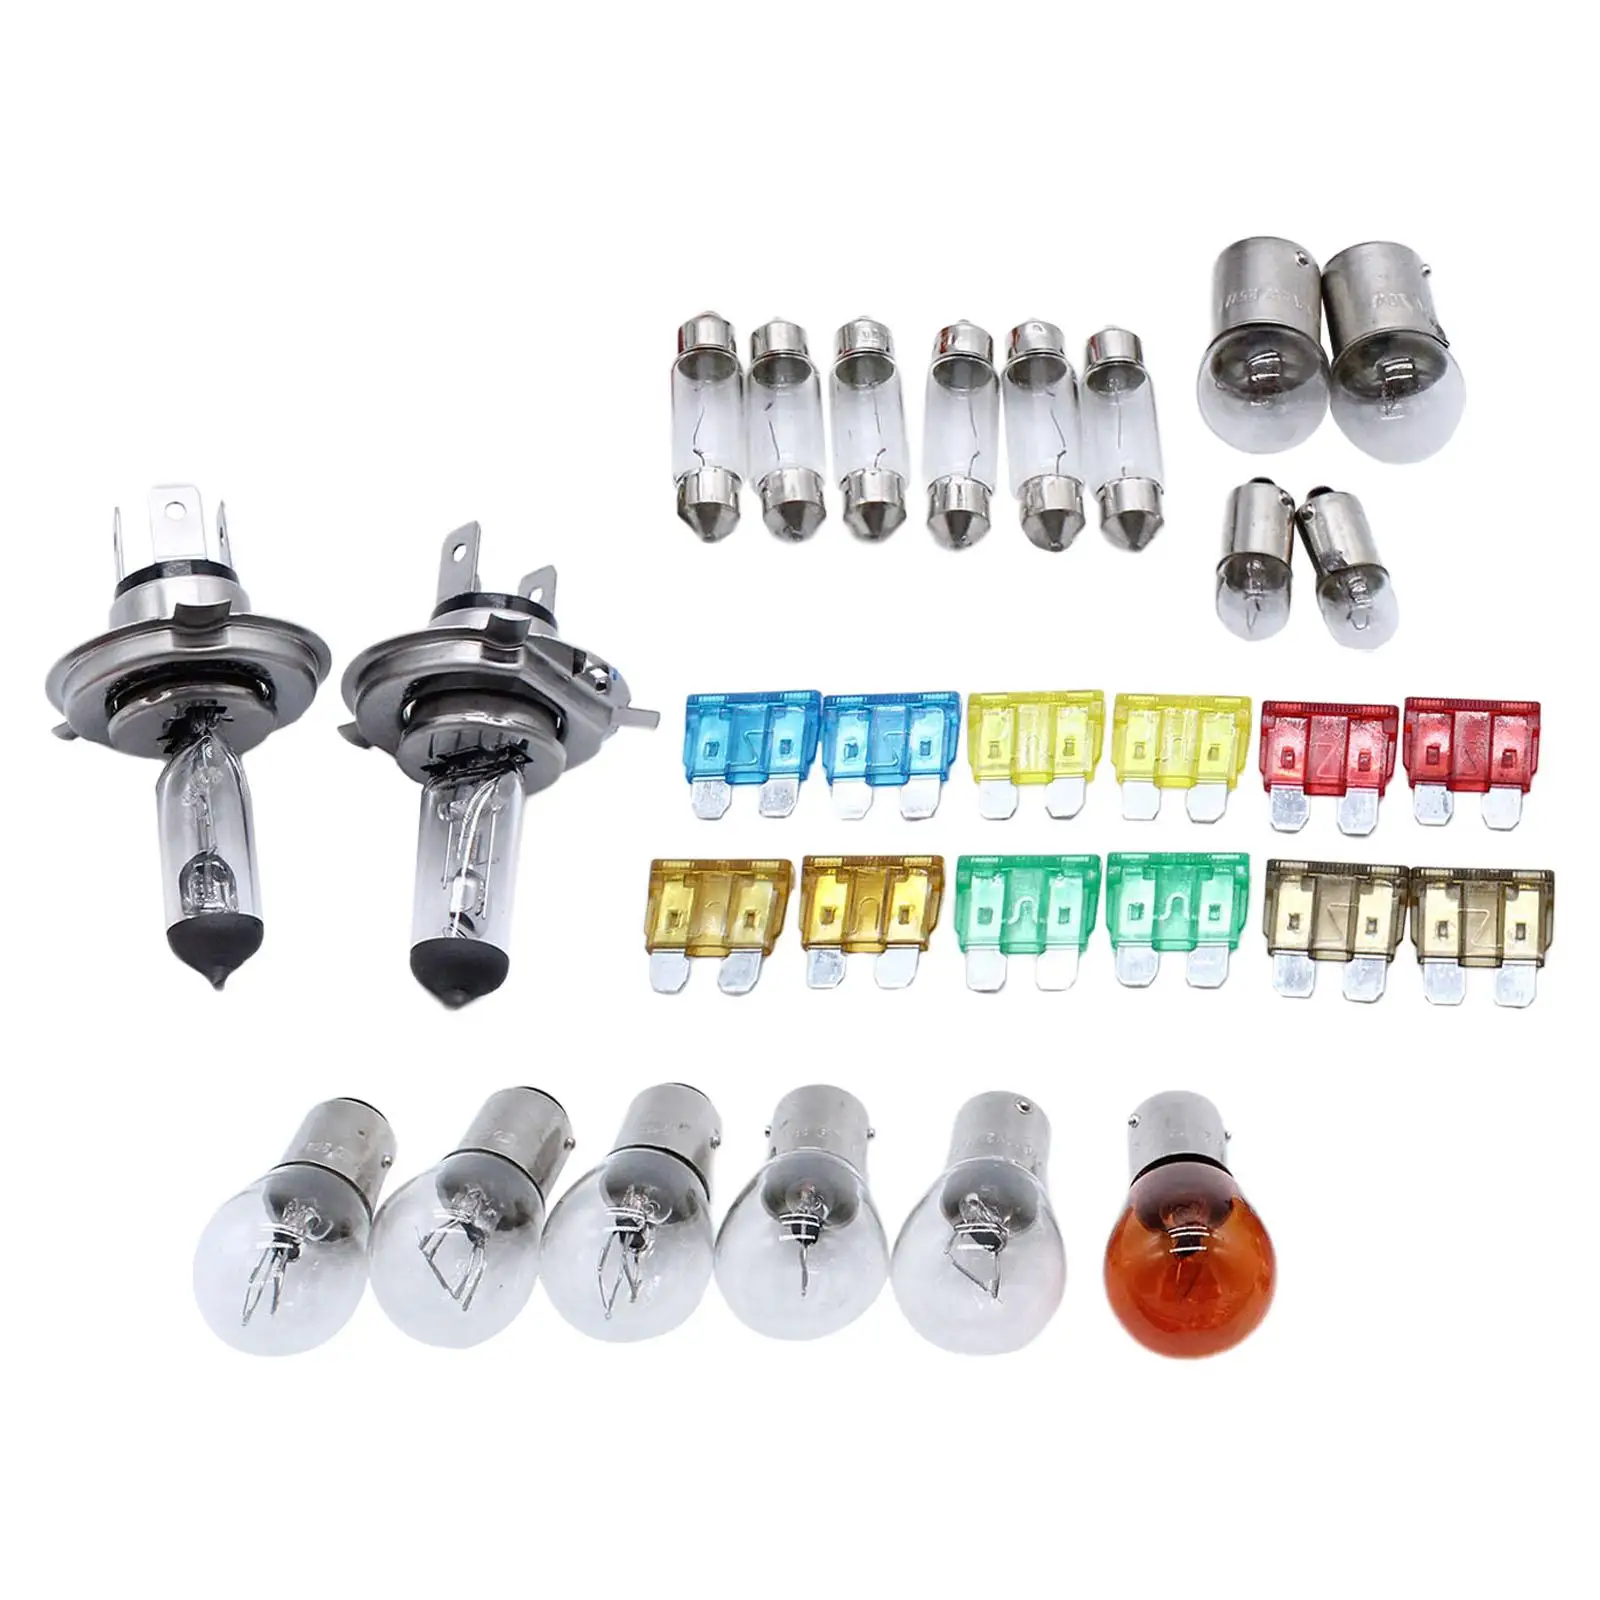 30Pcs H4 Light Bulb Kit Set Emergency Fuse LED Head Light Lamp Replacement Super Bright Plug Play for Driving Motorcycle